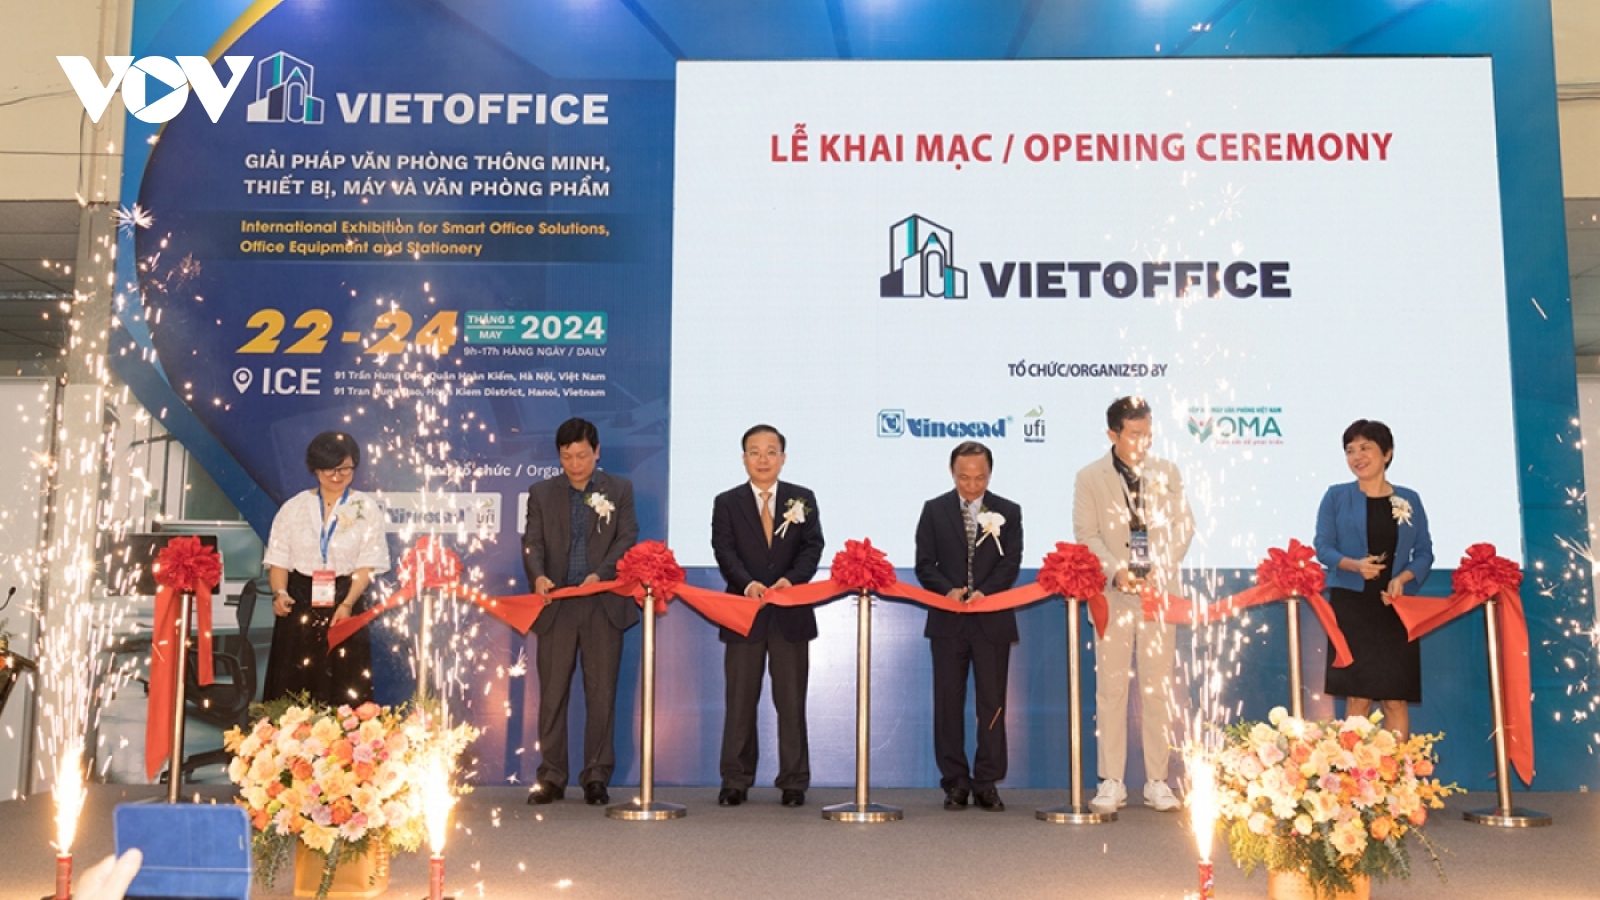 International Exhibition on Smart Office Solutions comes to Hanoi